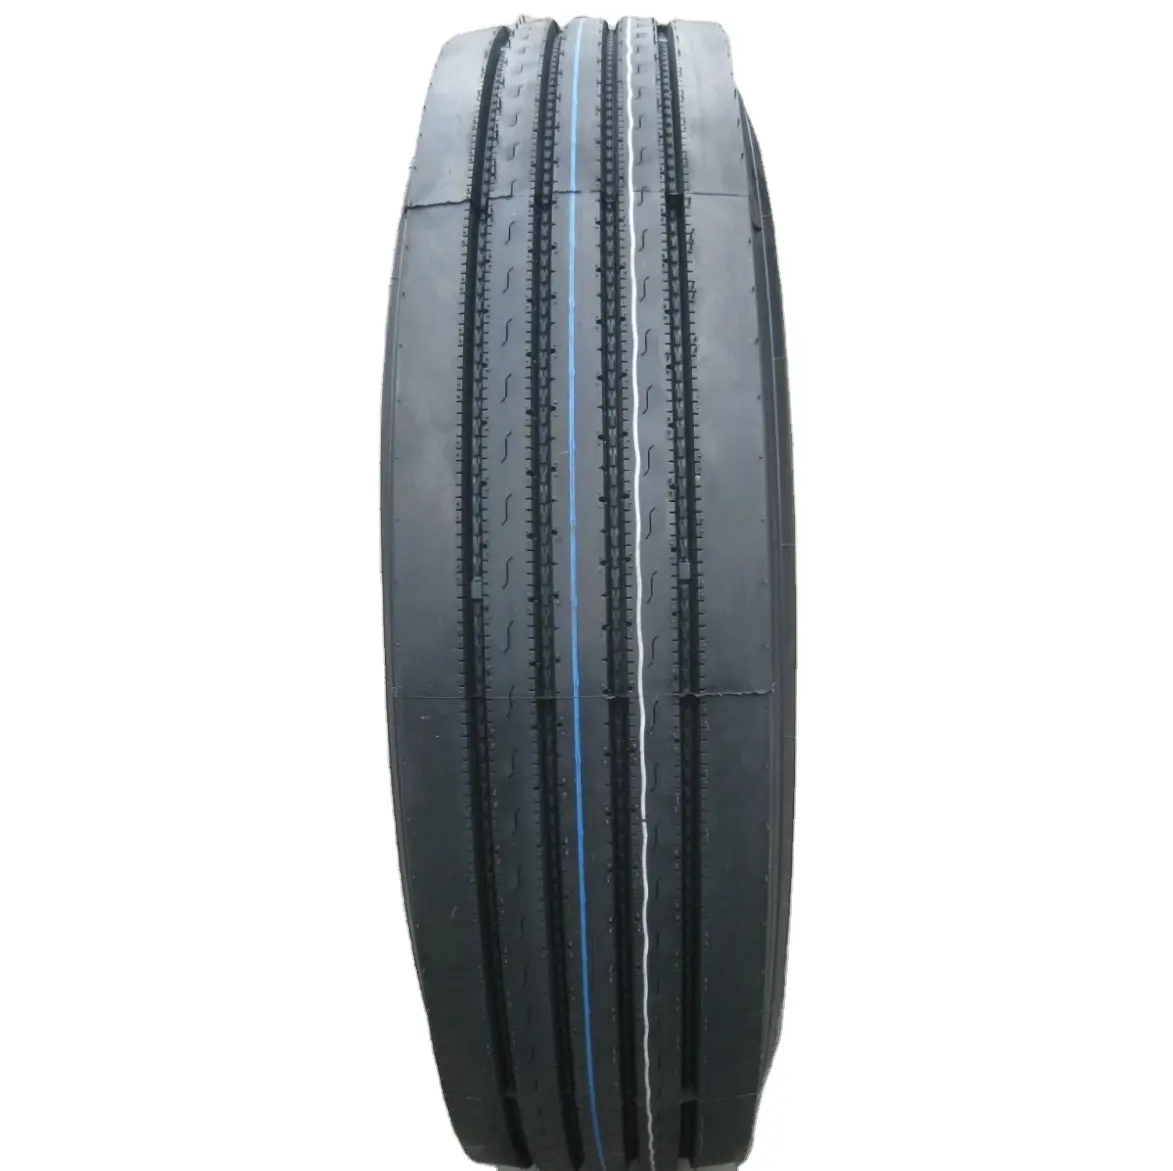 Semi tires 295/75R22.5 commercial truck tires 11R22.5 for America 11r24.5 295 75 22.5 295/75/22.5 low price Tire